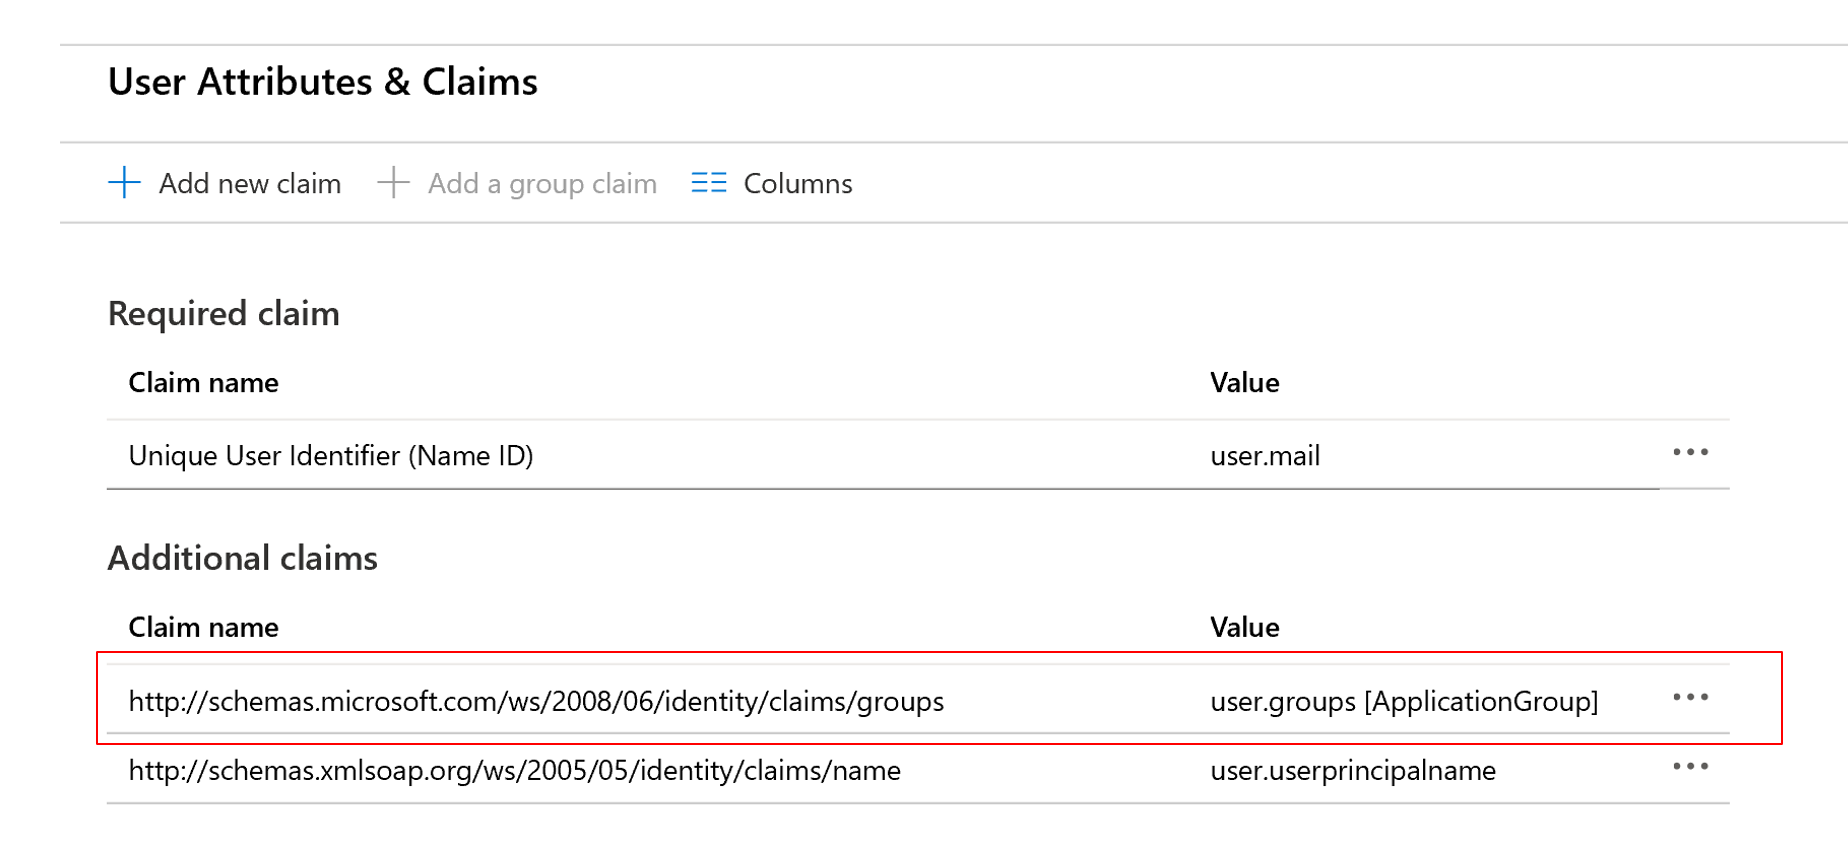 Screenshot of the area for user attributes and claims, with the name of a group claim highlighted.